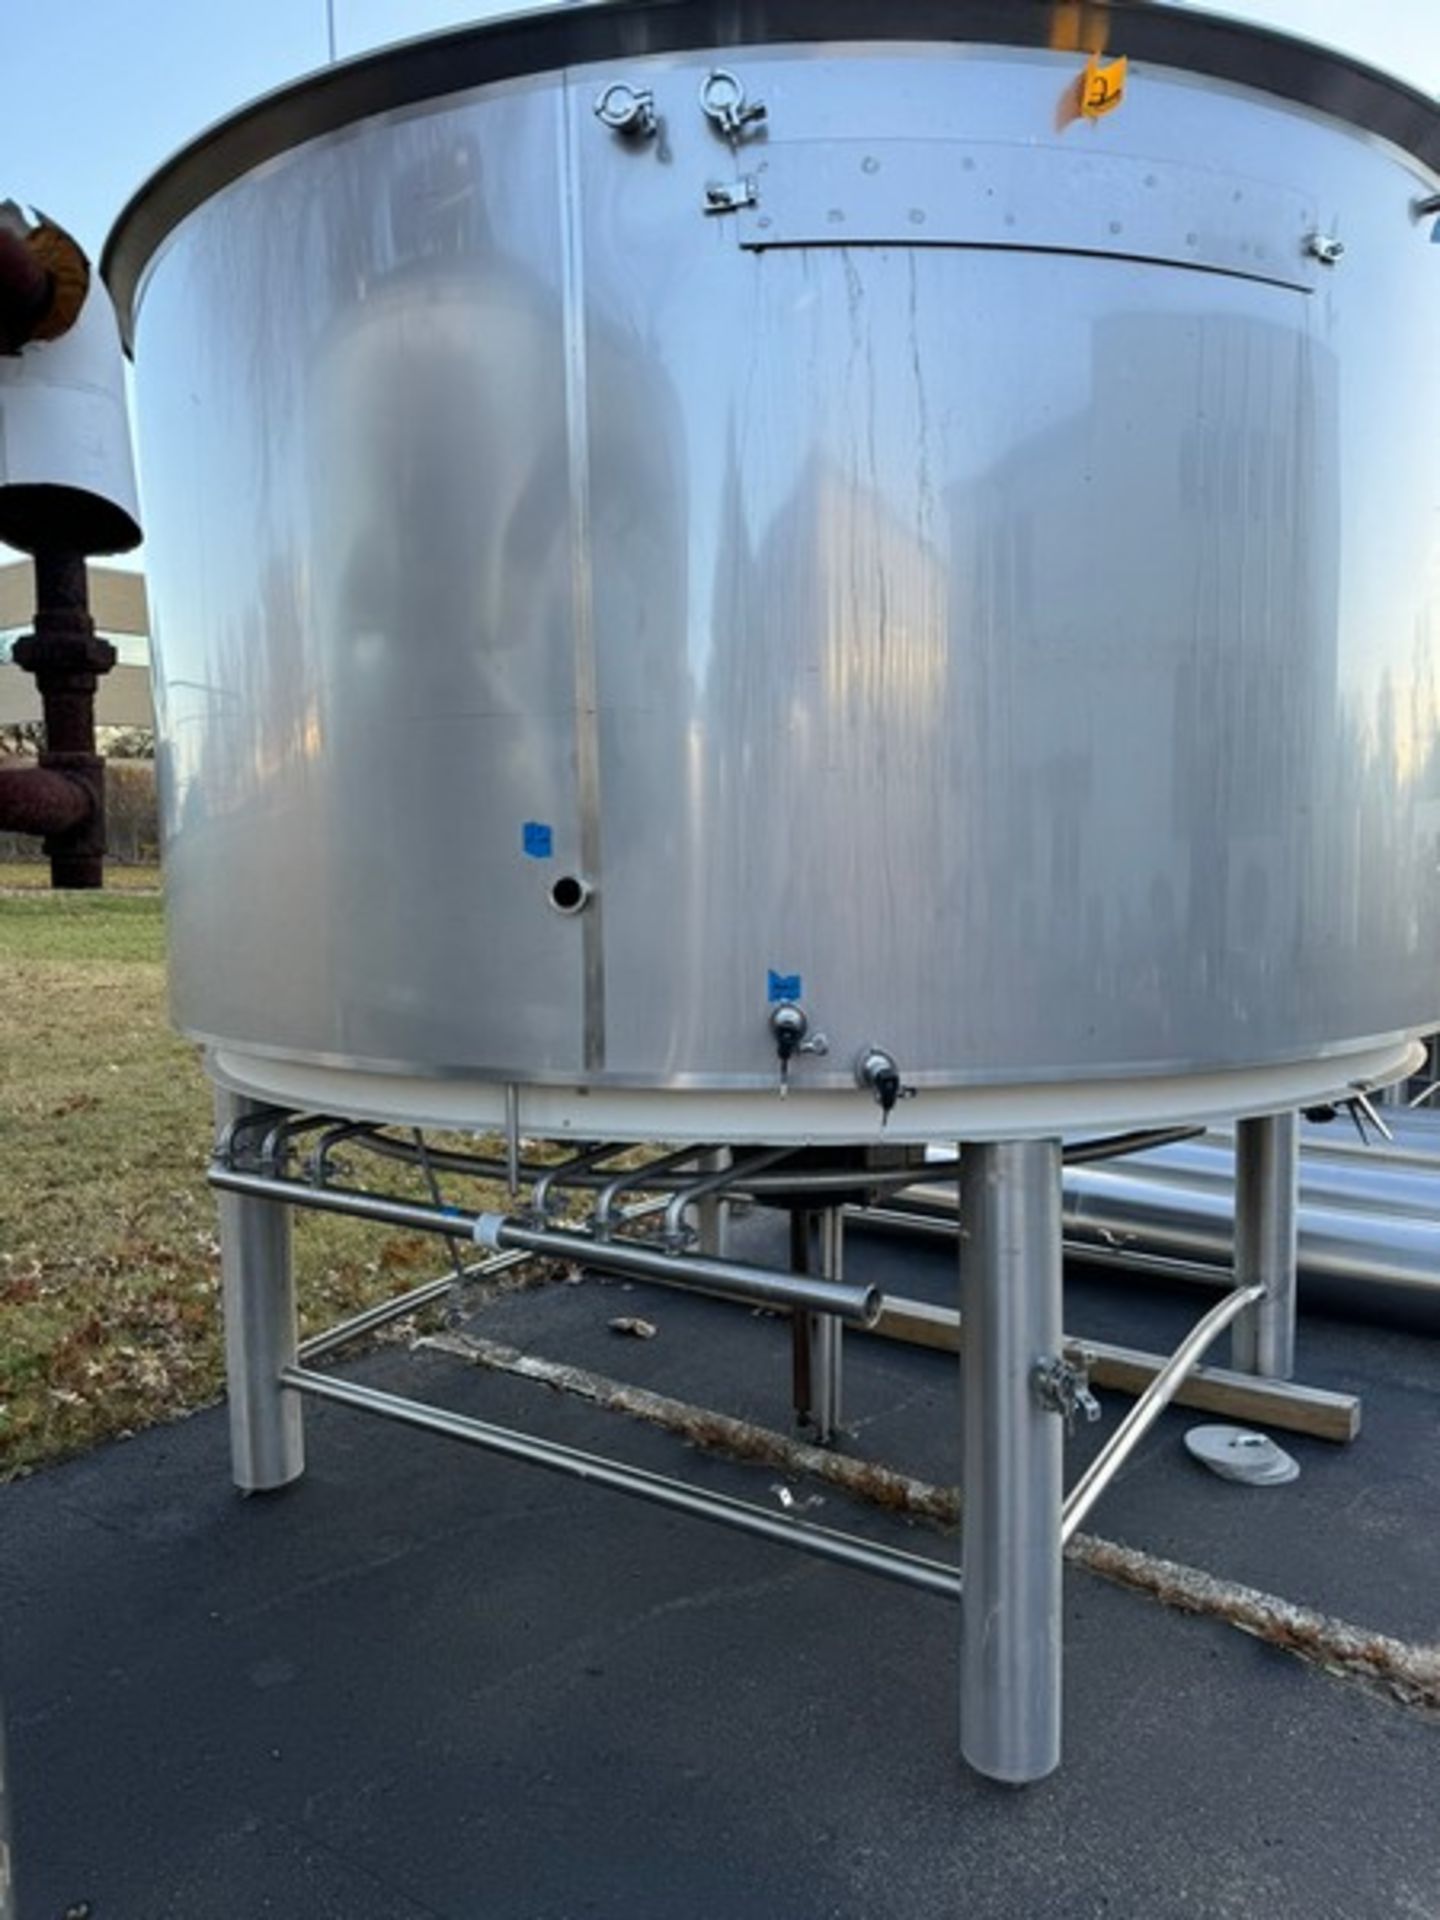 2012 Specific Mechanical Systems 45 BBL Capacity S/S Lauter Tun Tank, S/N RMP-136-12, with Legs, - Image 8 of 14